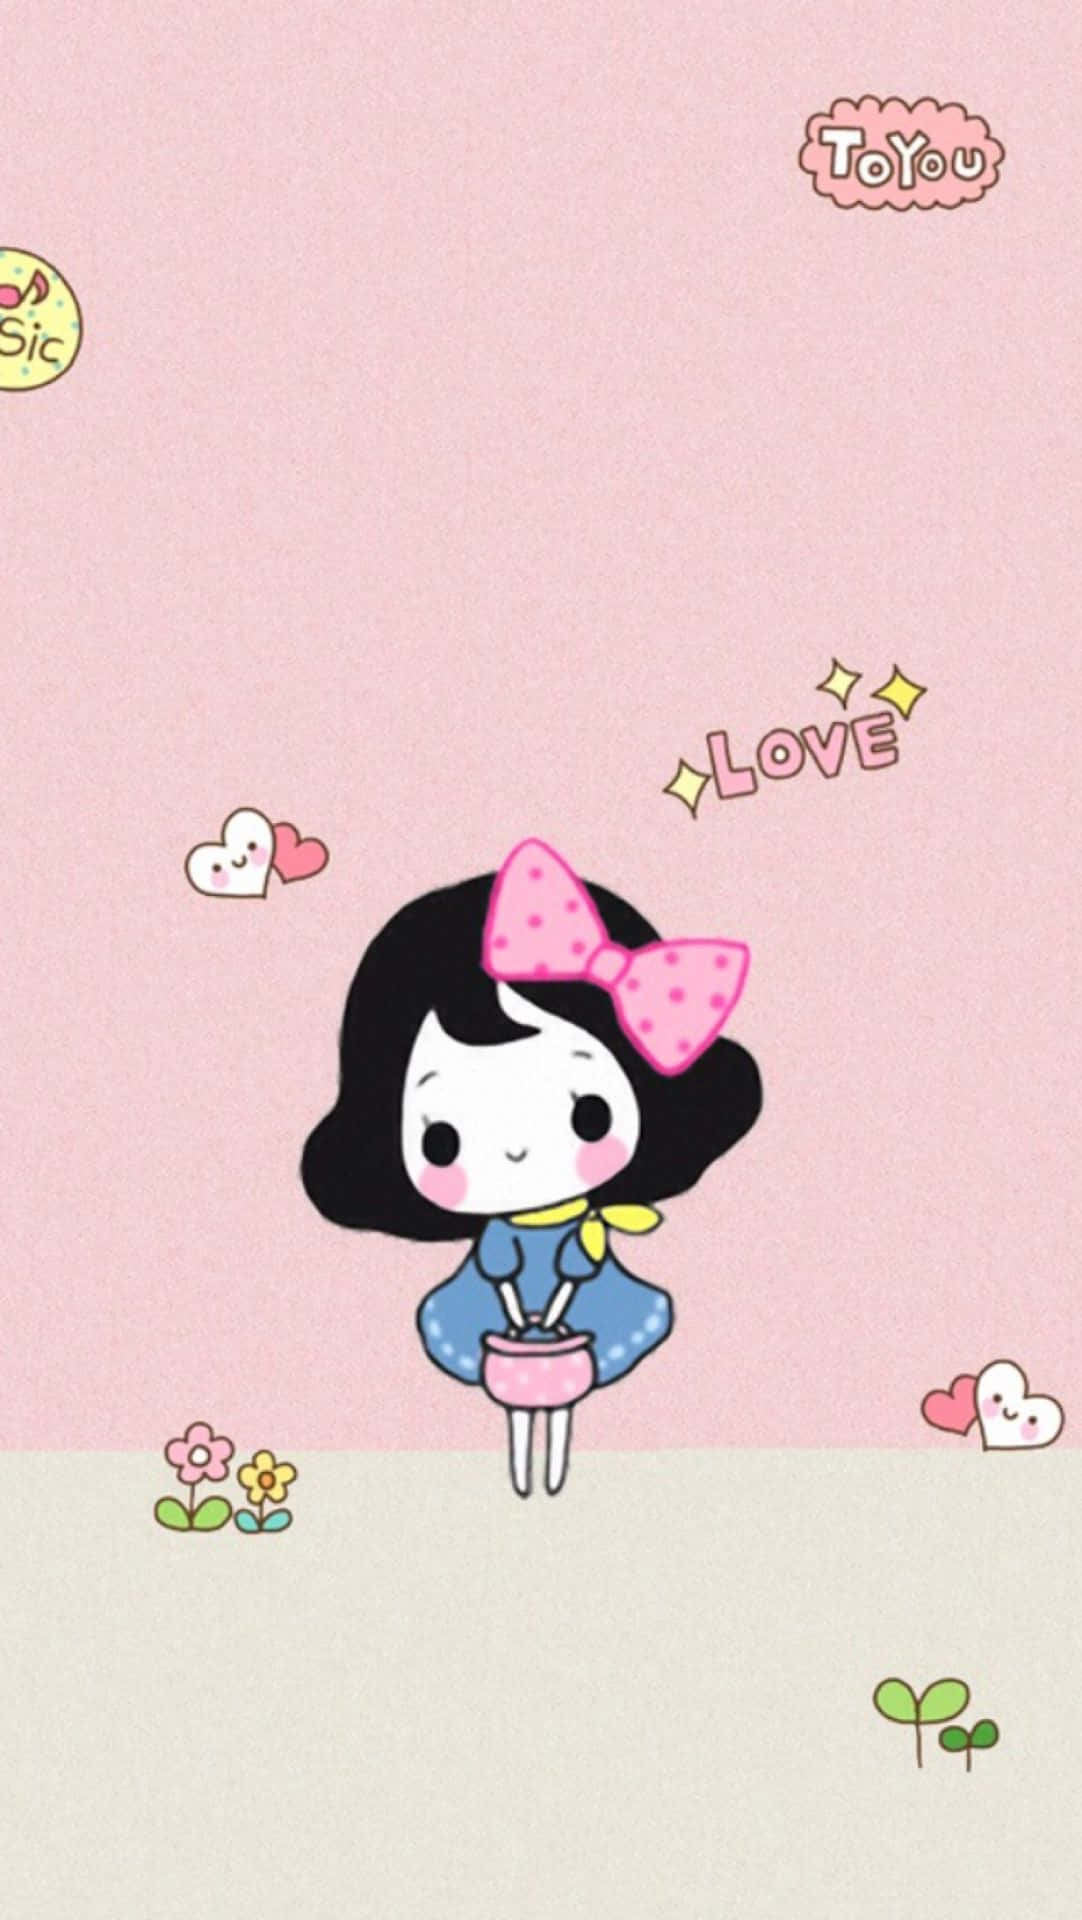 Cute Background Cartoon Girl With Bow